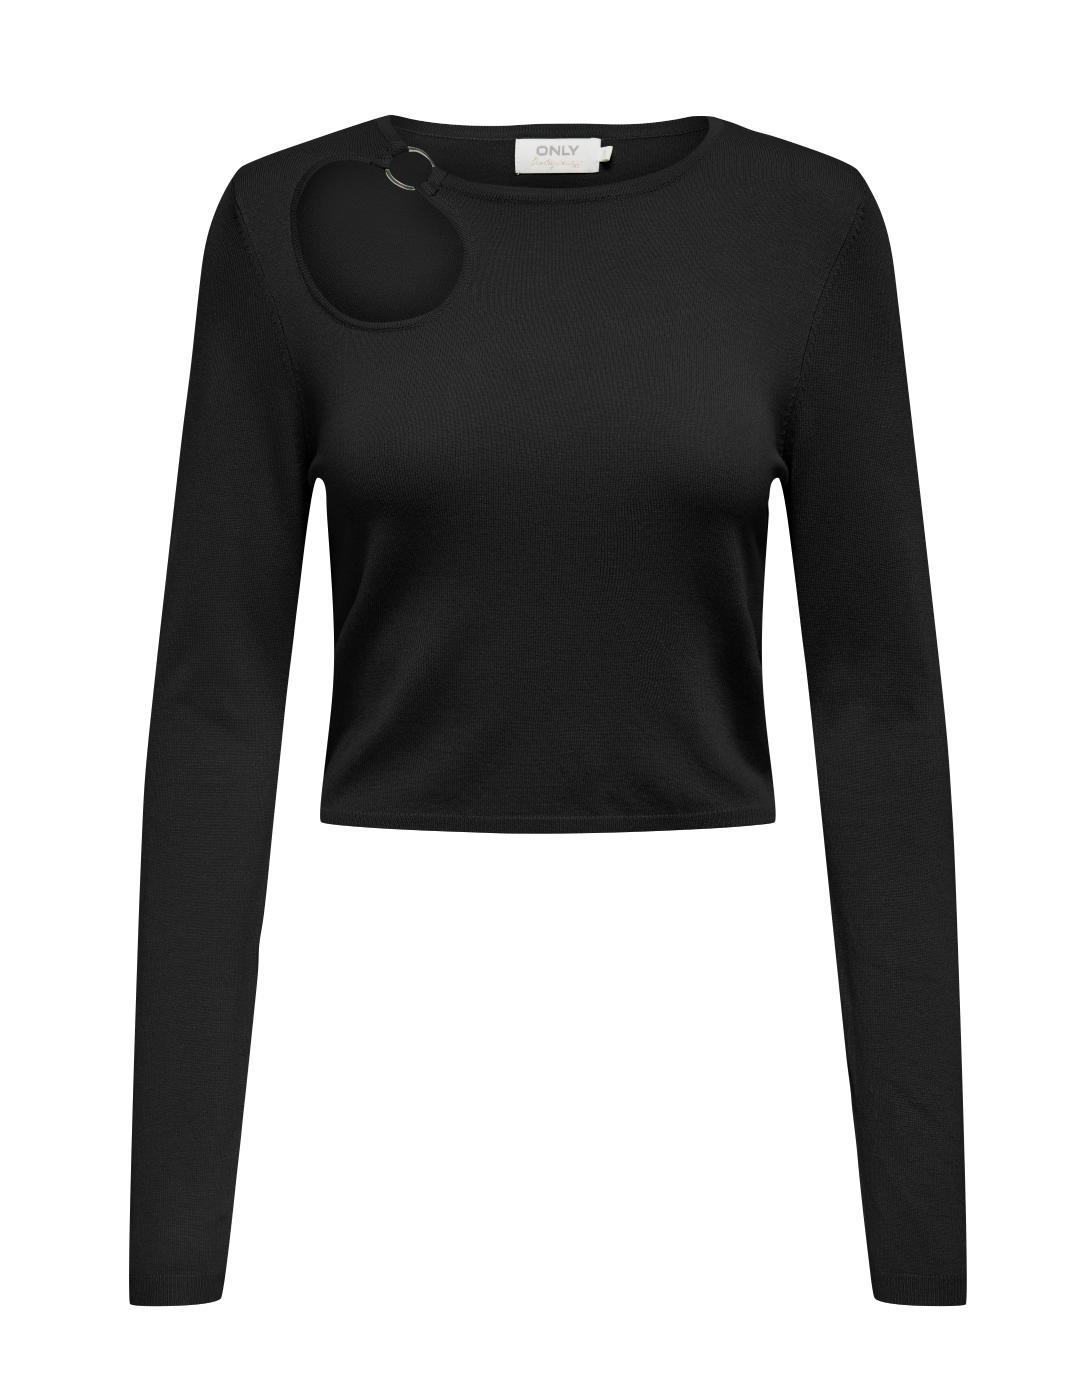 Top cropped Only Lilian detalle cuello negro mujer